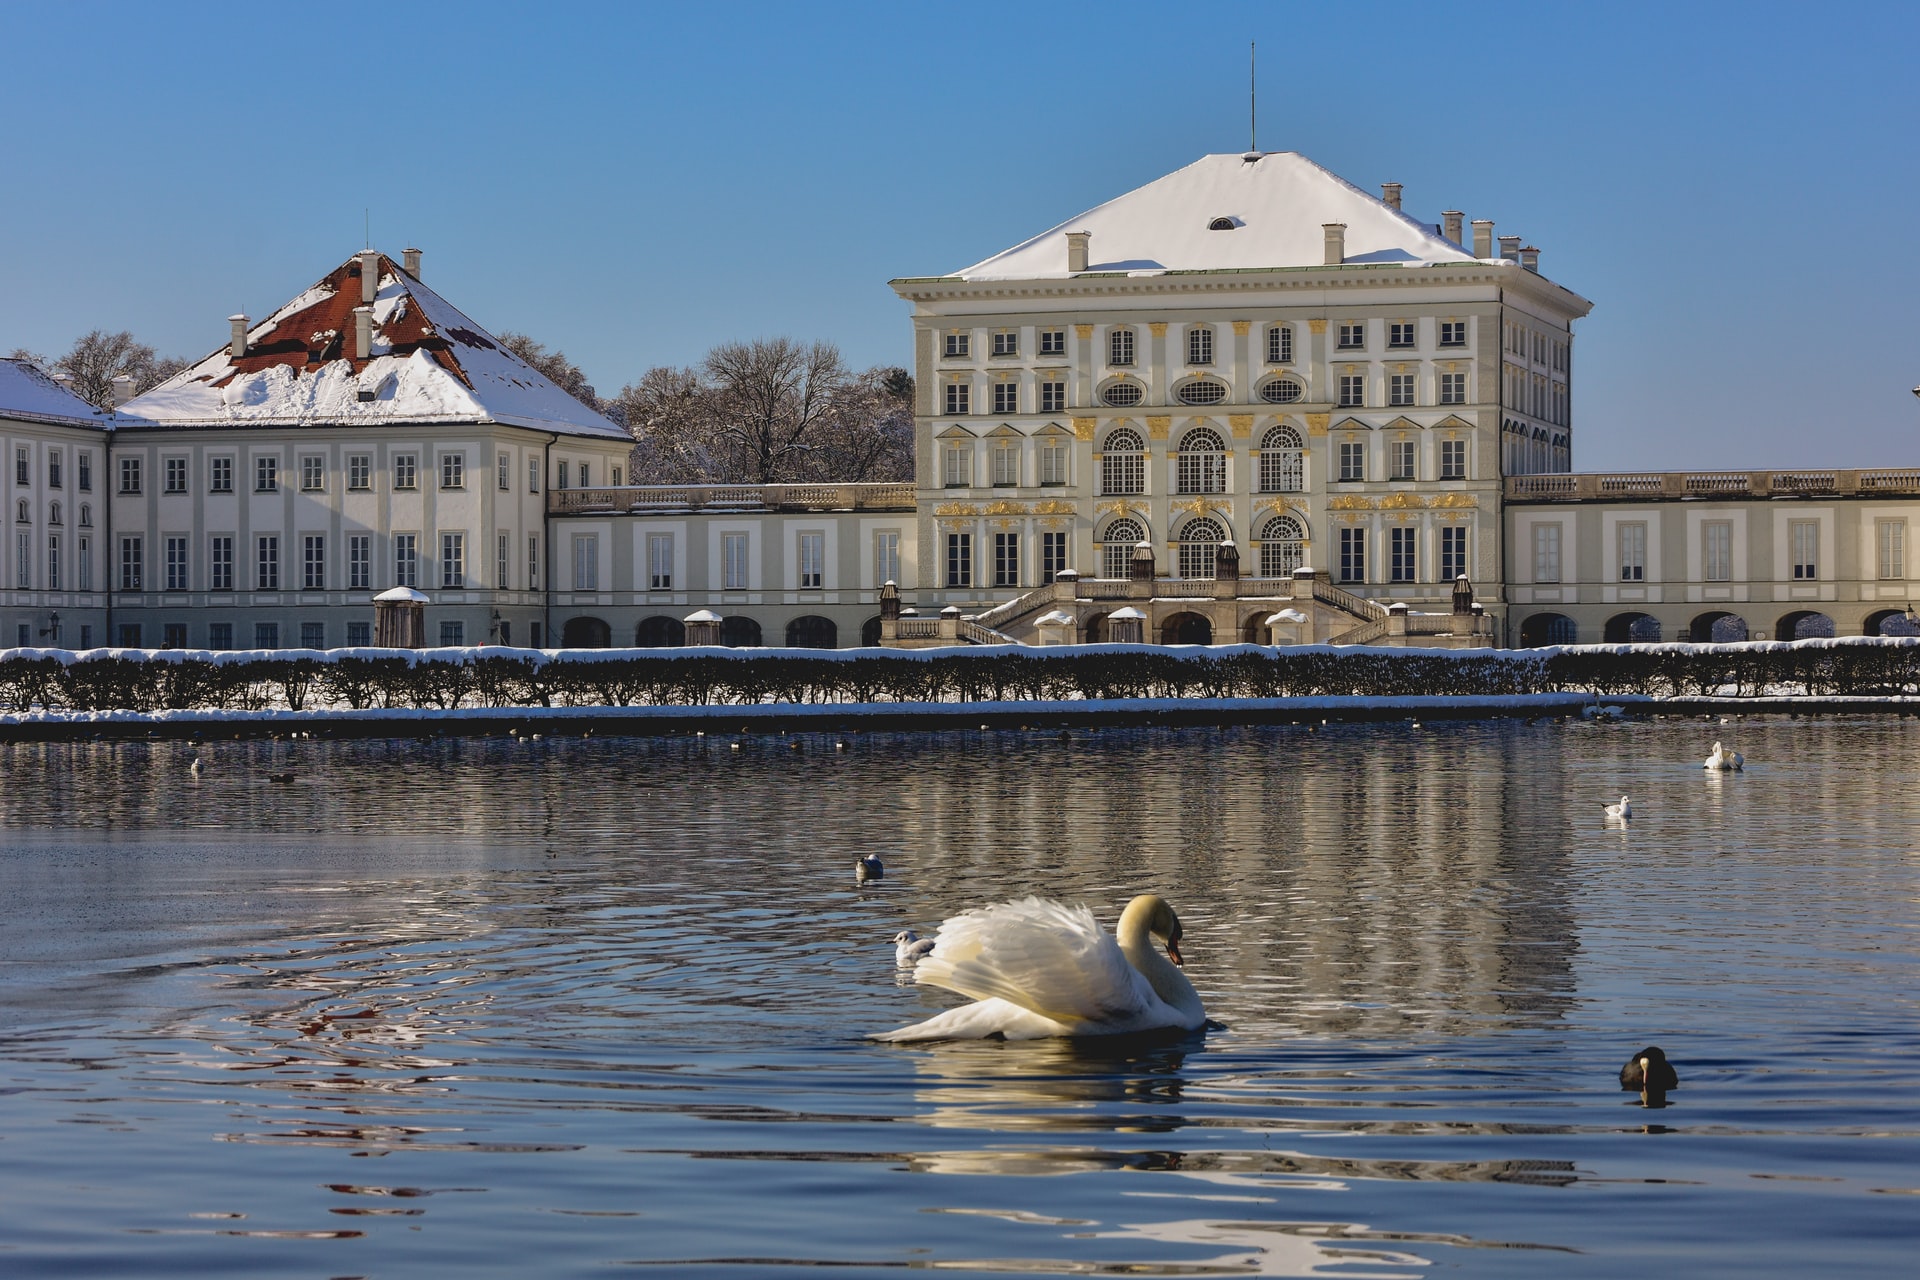 Palace in wintertime at a lake with swans.